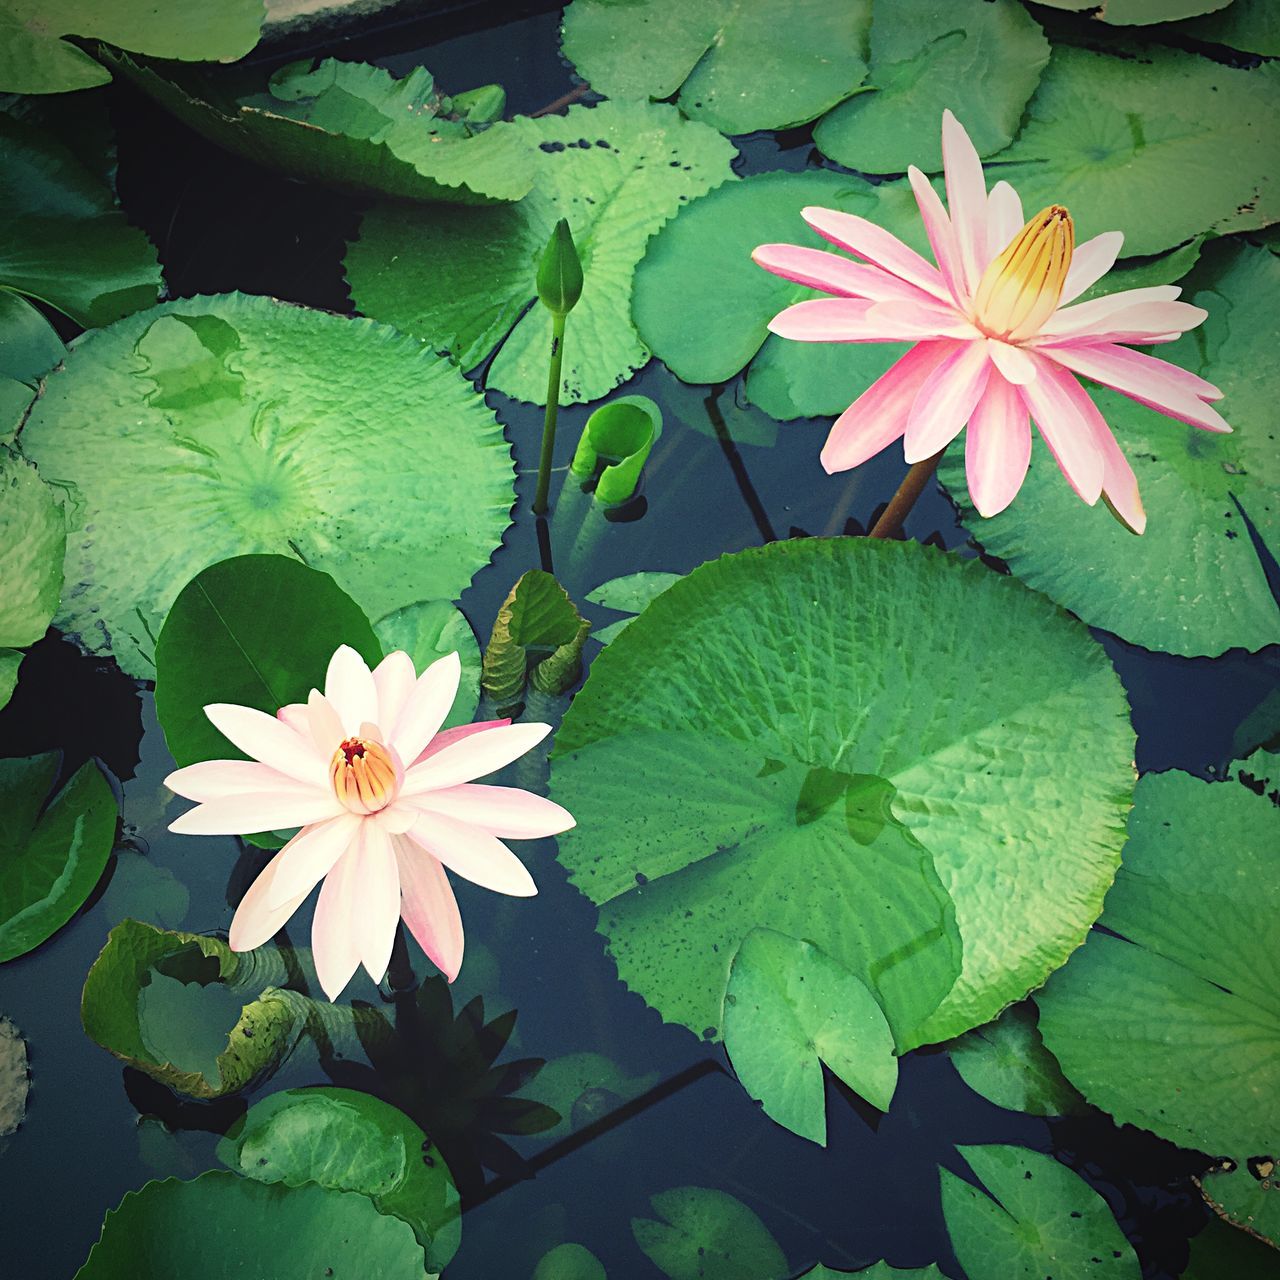 leaf, flower, freshness, petal, fragility, growth, water lily, flower head, beauty in nature, water, pond, plant, nature, high angle view, green color, blooming, floating on water, close-up, lotus water lily, in bloom